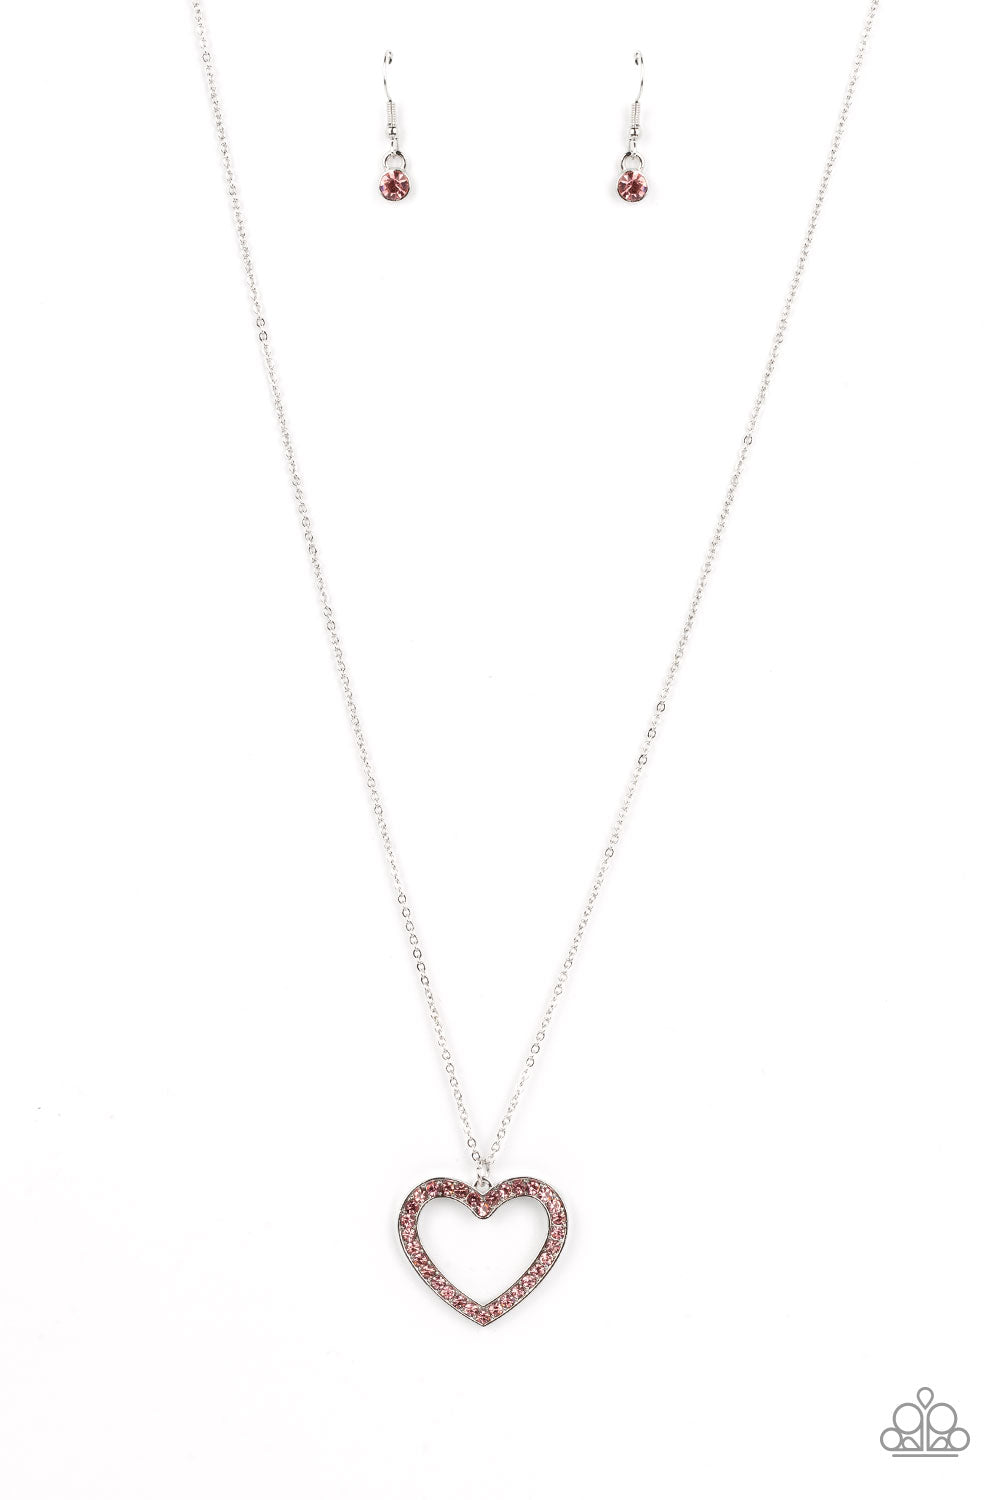 Dainty Darling - Pink (Heart) Necklace